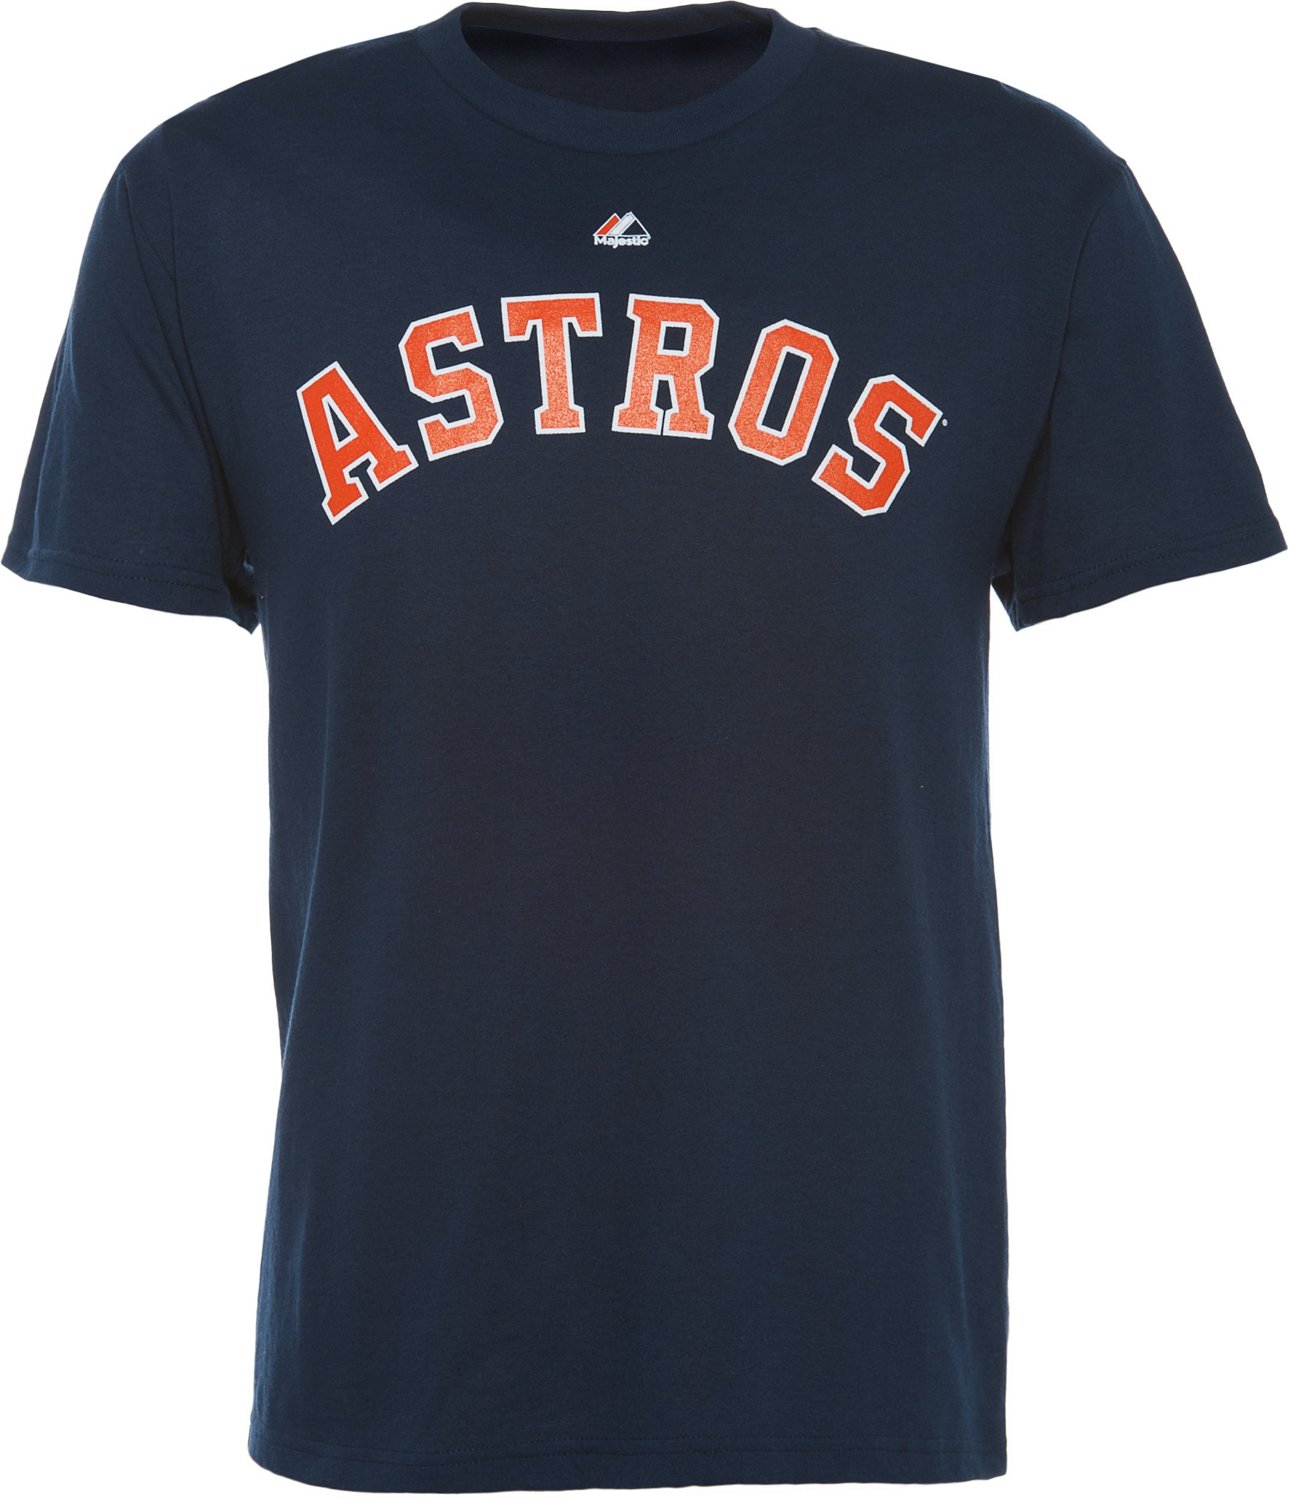 Majestic Men's Houston Astros Cooperstown Astrodome T-shirt